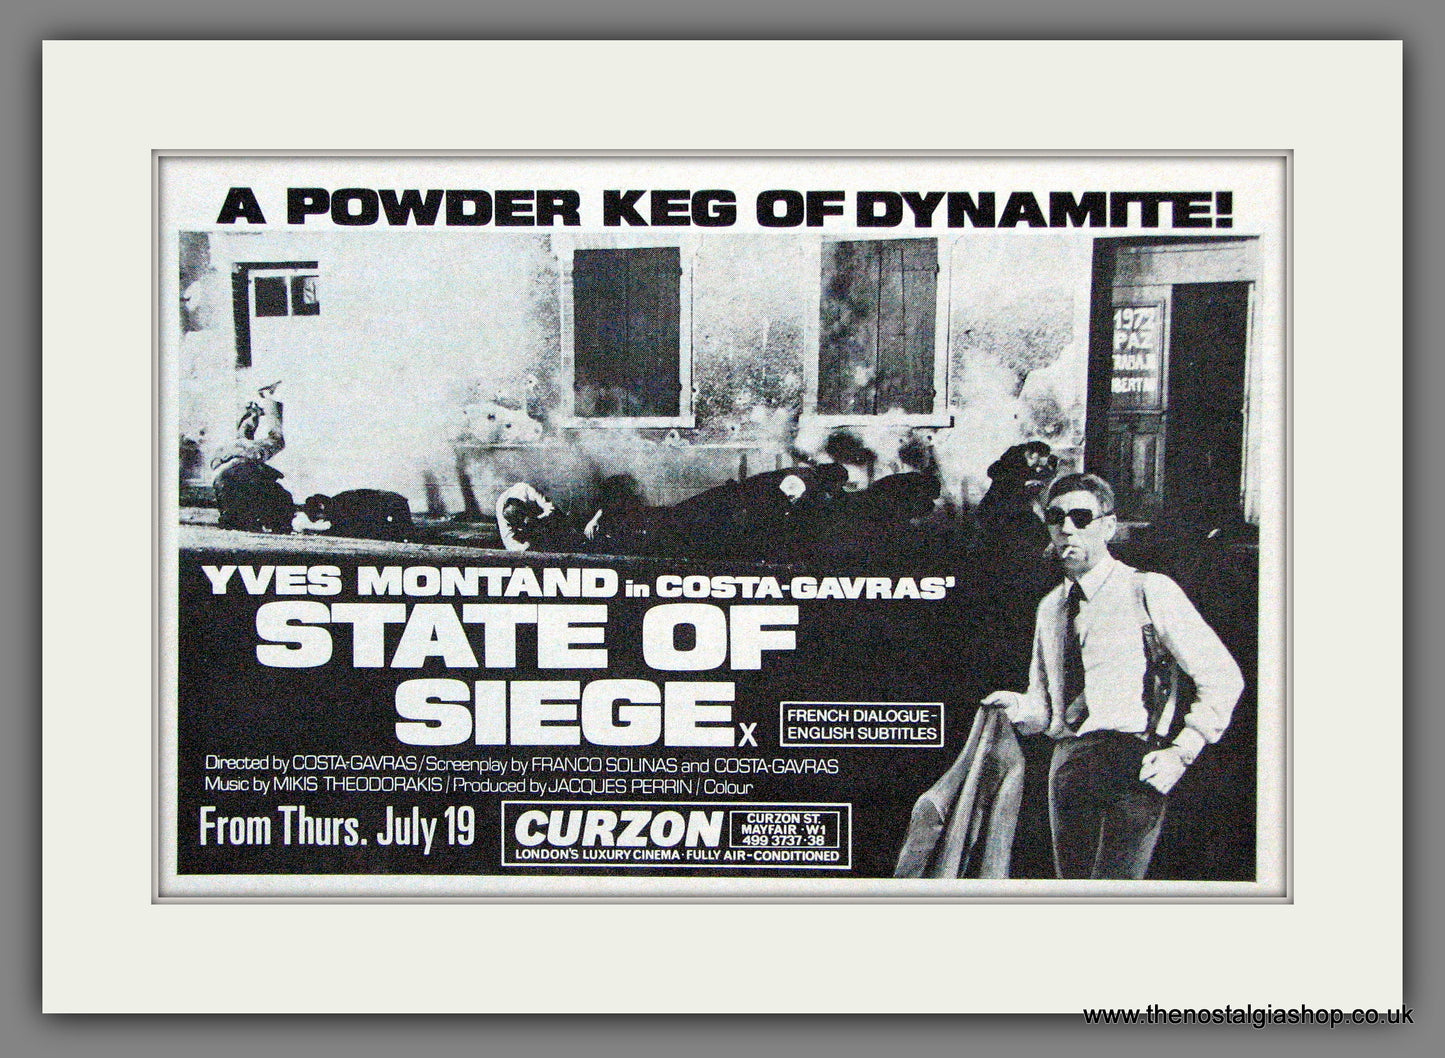 State Of Siege. Yves Montand. 1973 Original Film Advert (ref AD56132)